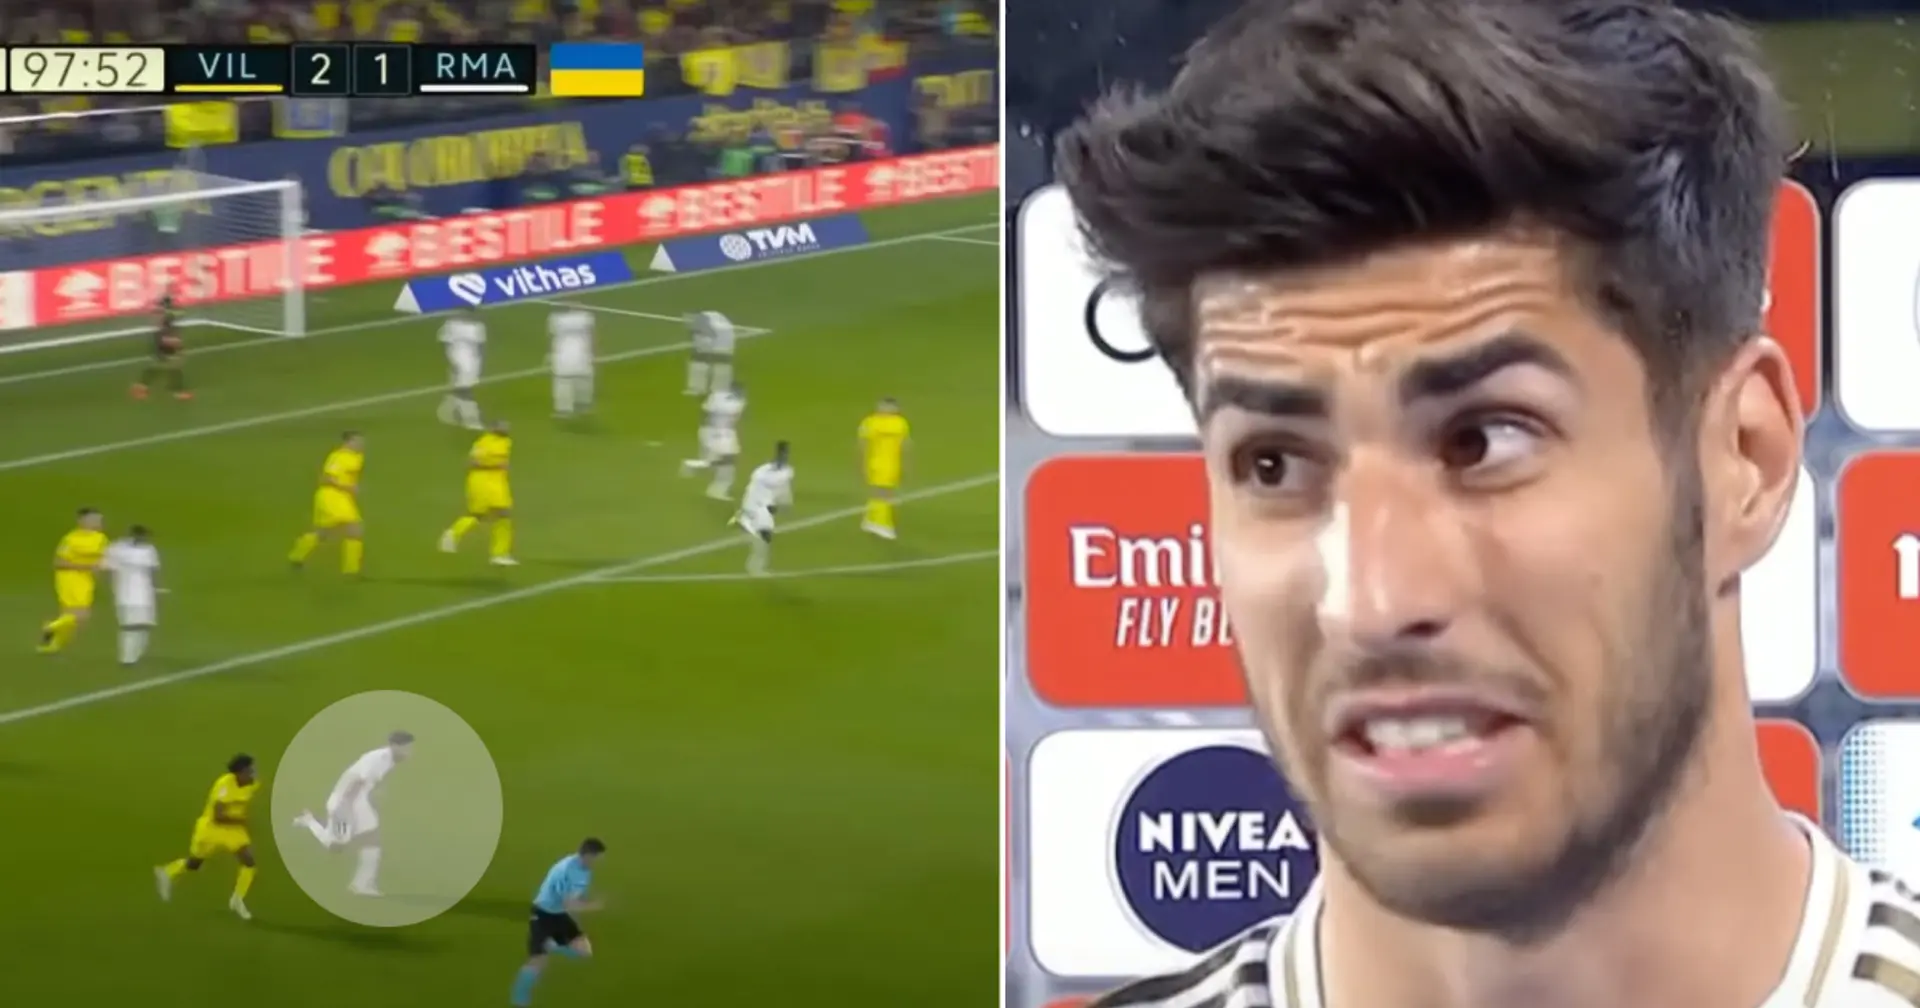 'This is sending me': one Asensio episode from Villarreal clash goes viral